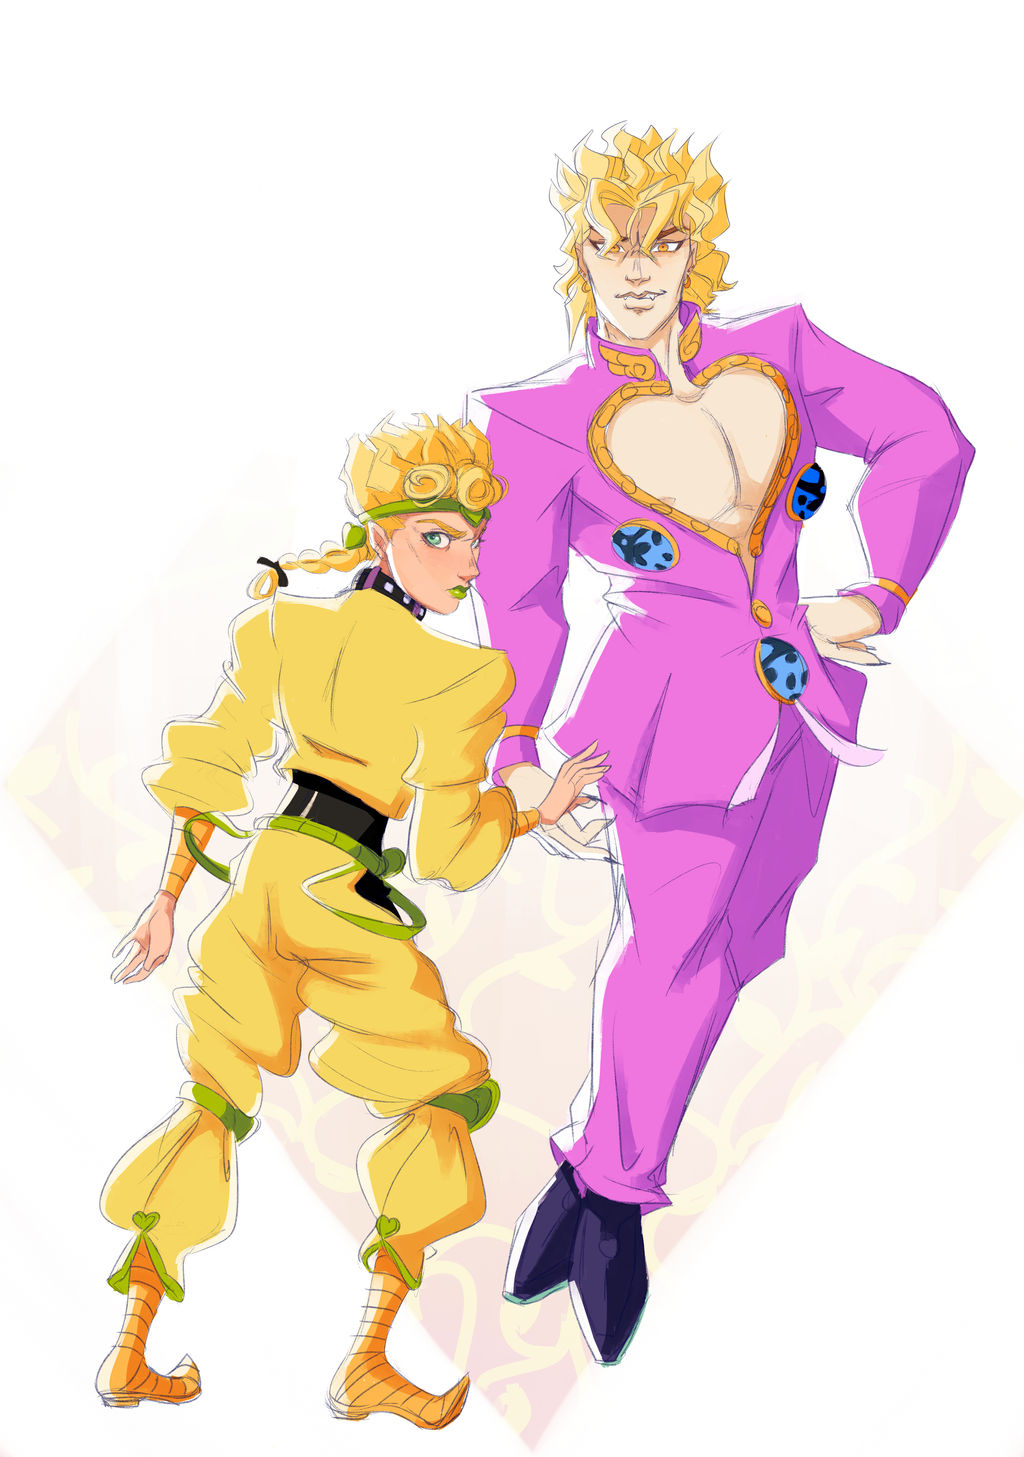 Giorno/Dio Outfit Swap by Ink-Dash on DeviantArt